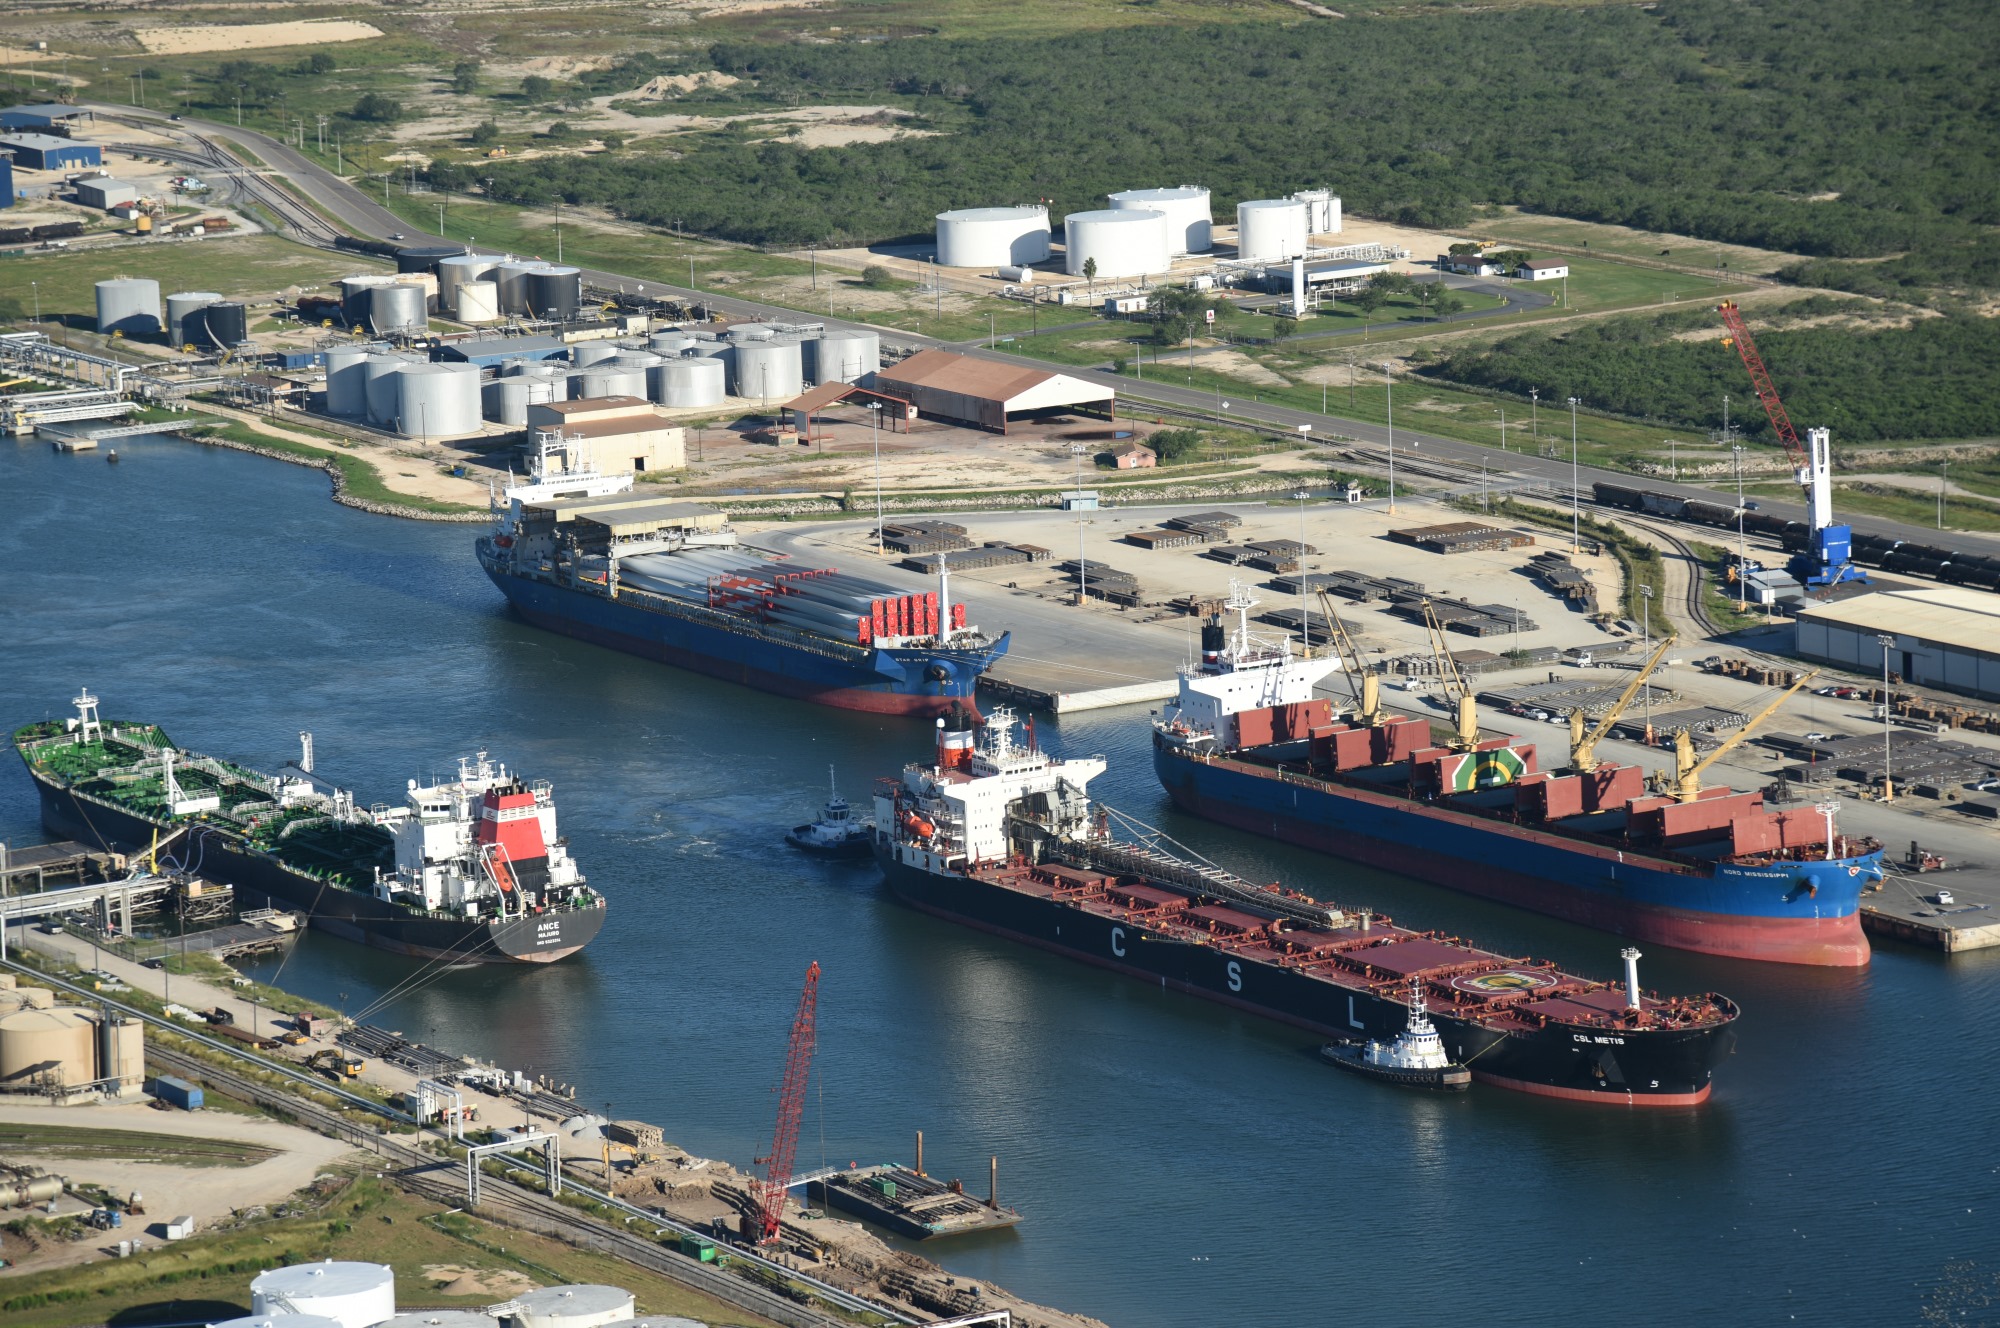 Port of Brownsville Foreign Trade Zone Ranks Number 2 in the U.S. for Value of Exports